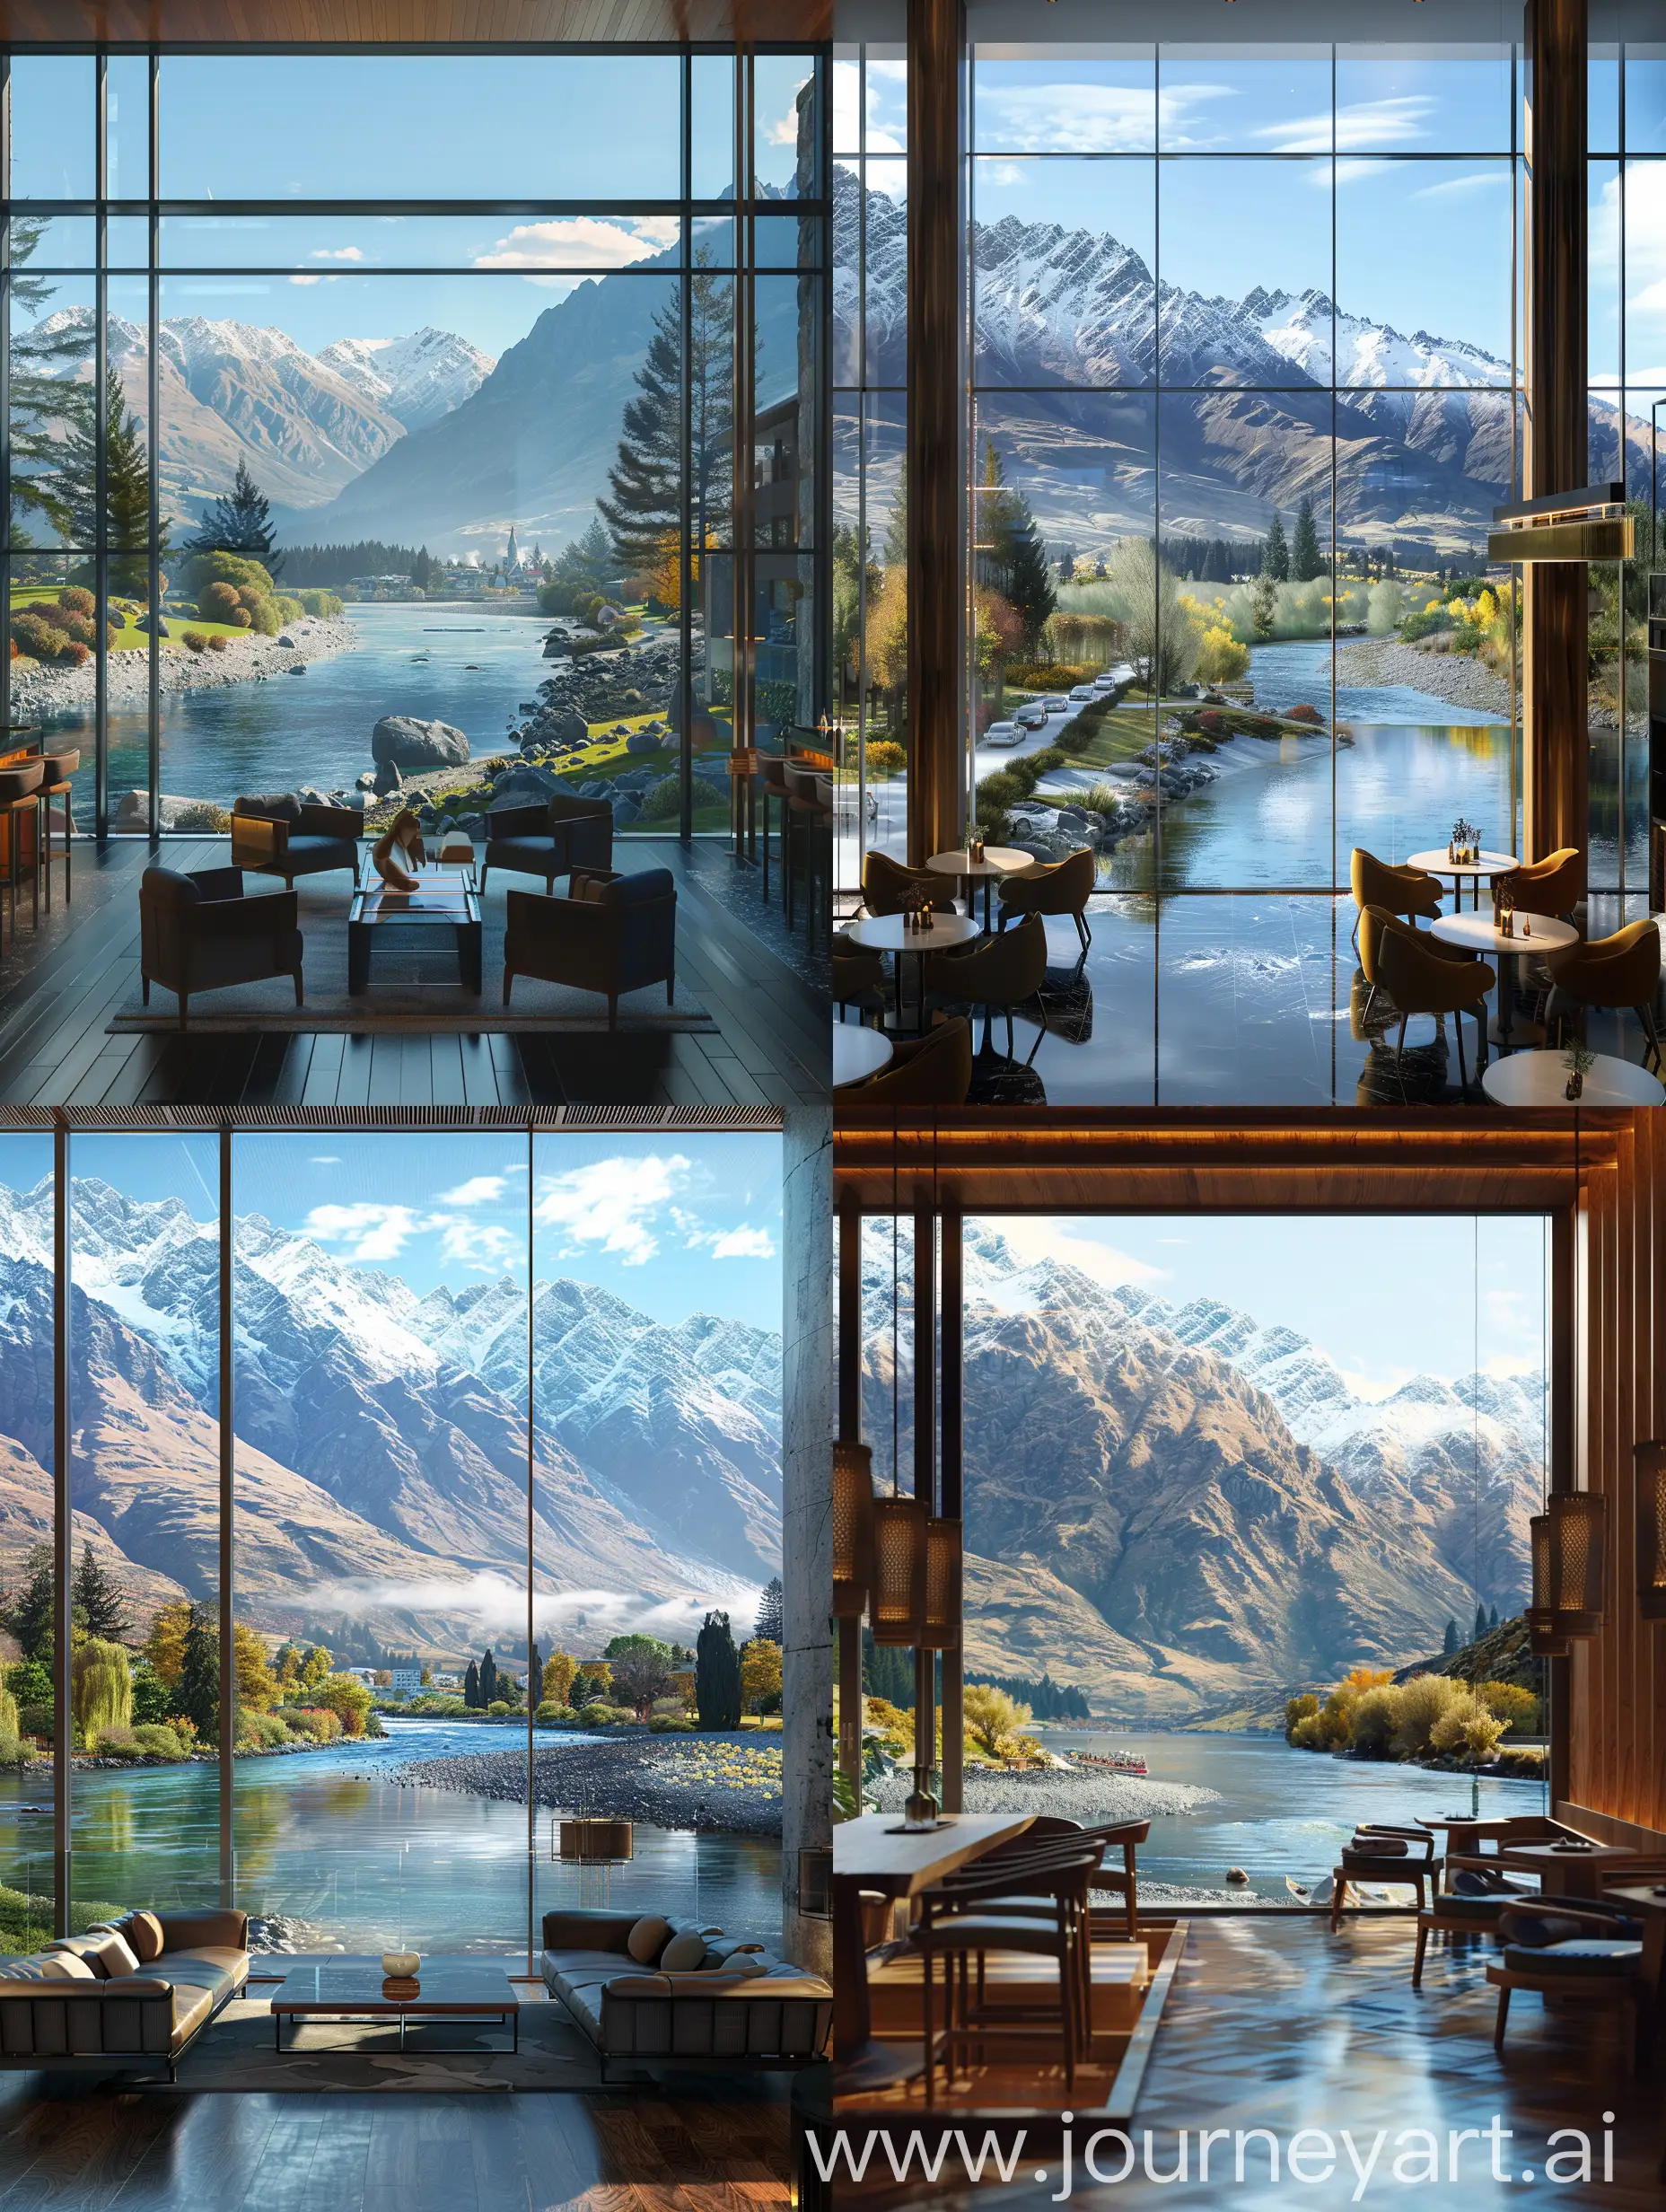 hyperrealistic visualization of an interior of a modern hotel in Queenstown New Zealand looking at a river and mountains